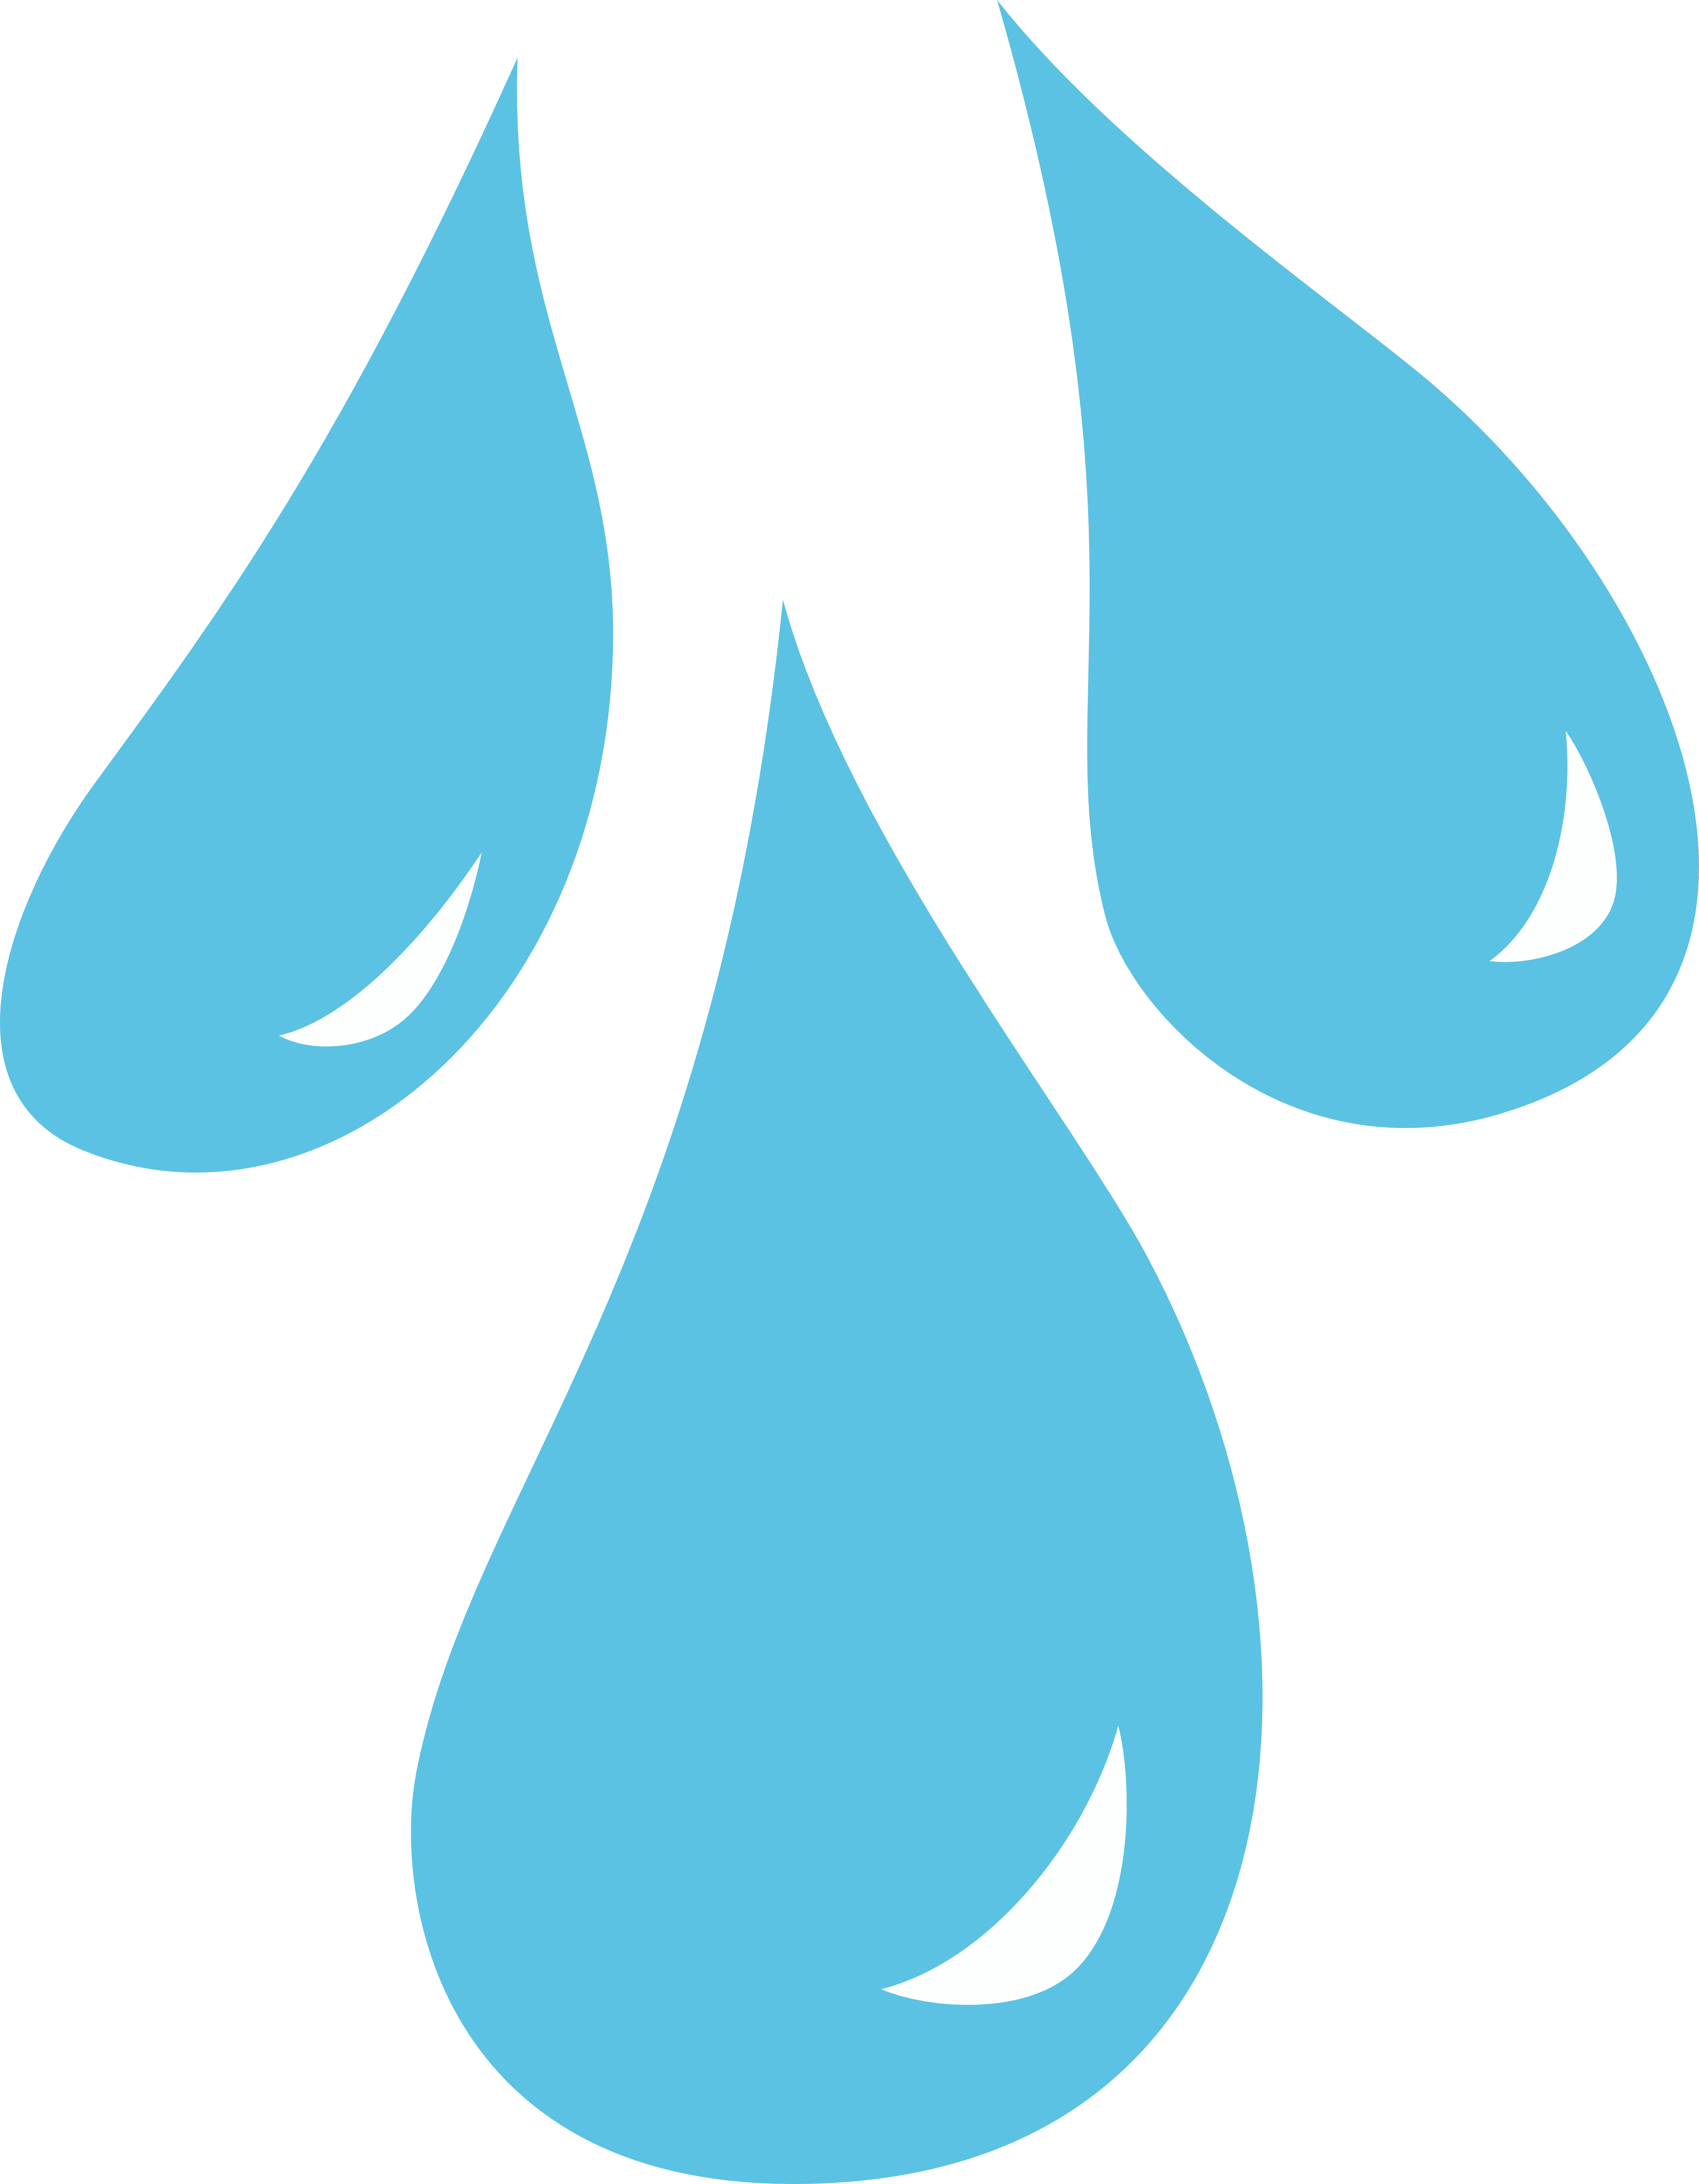 Raindrops Template Printable - ClipArt Best